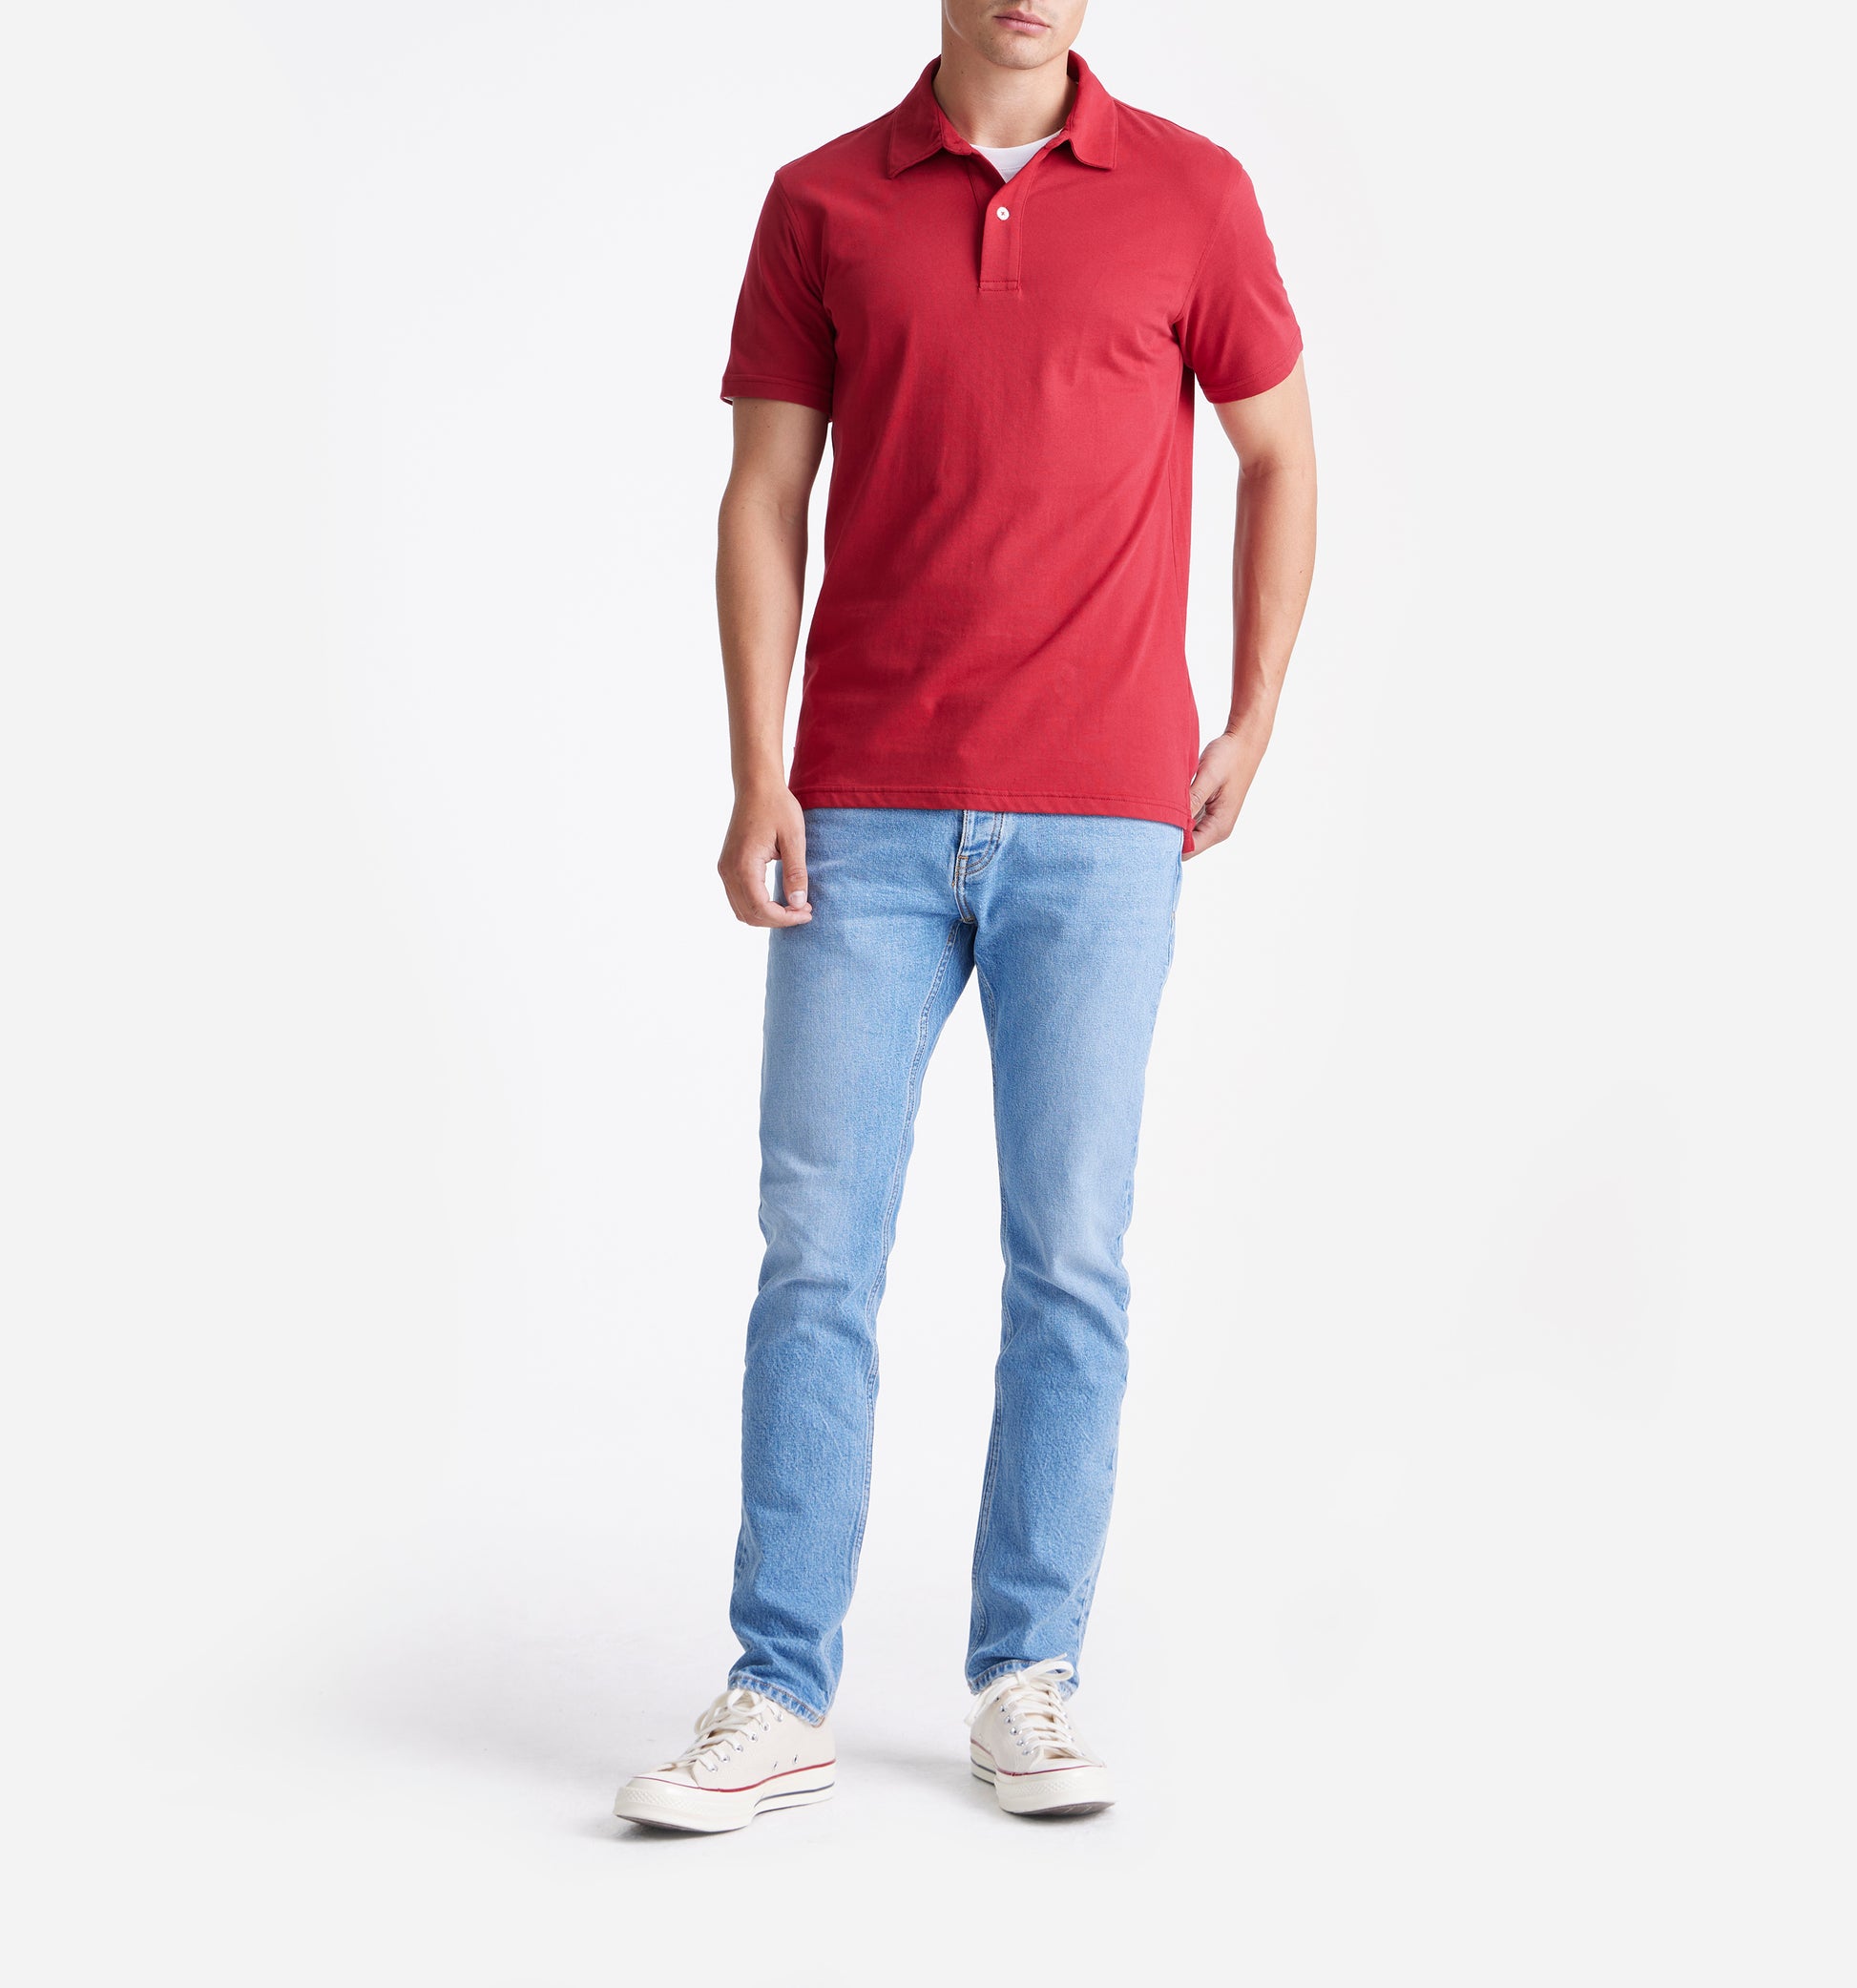 The James - Jersey Cotton Polo In Red From King Essentials